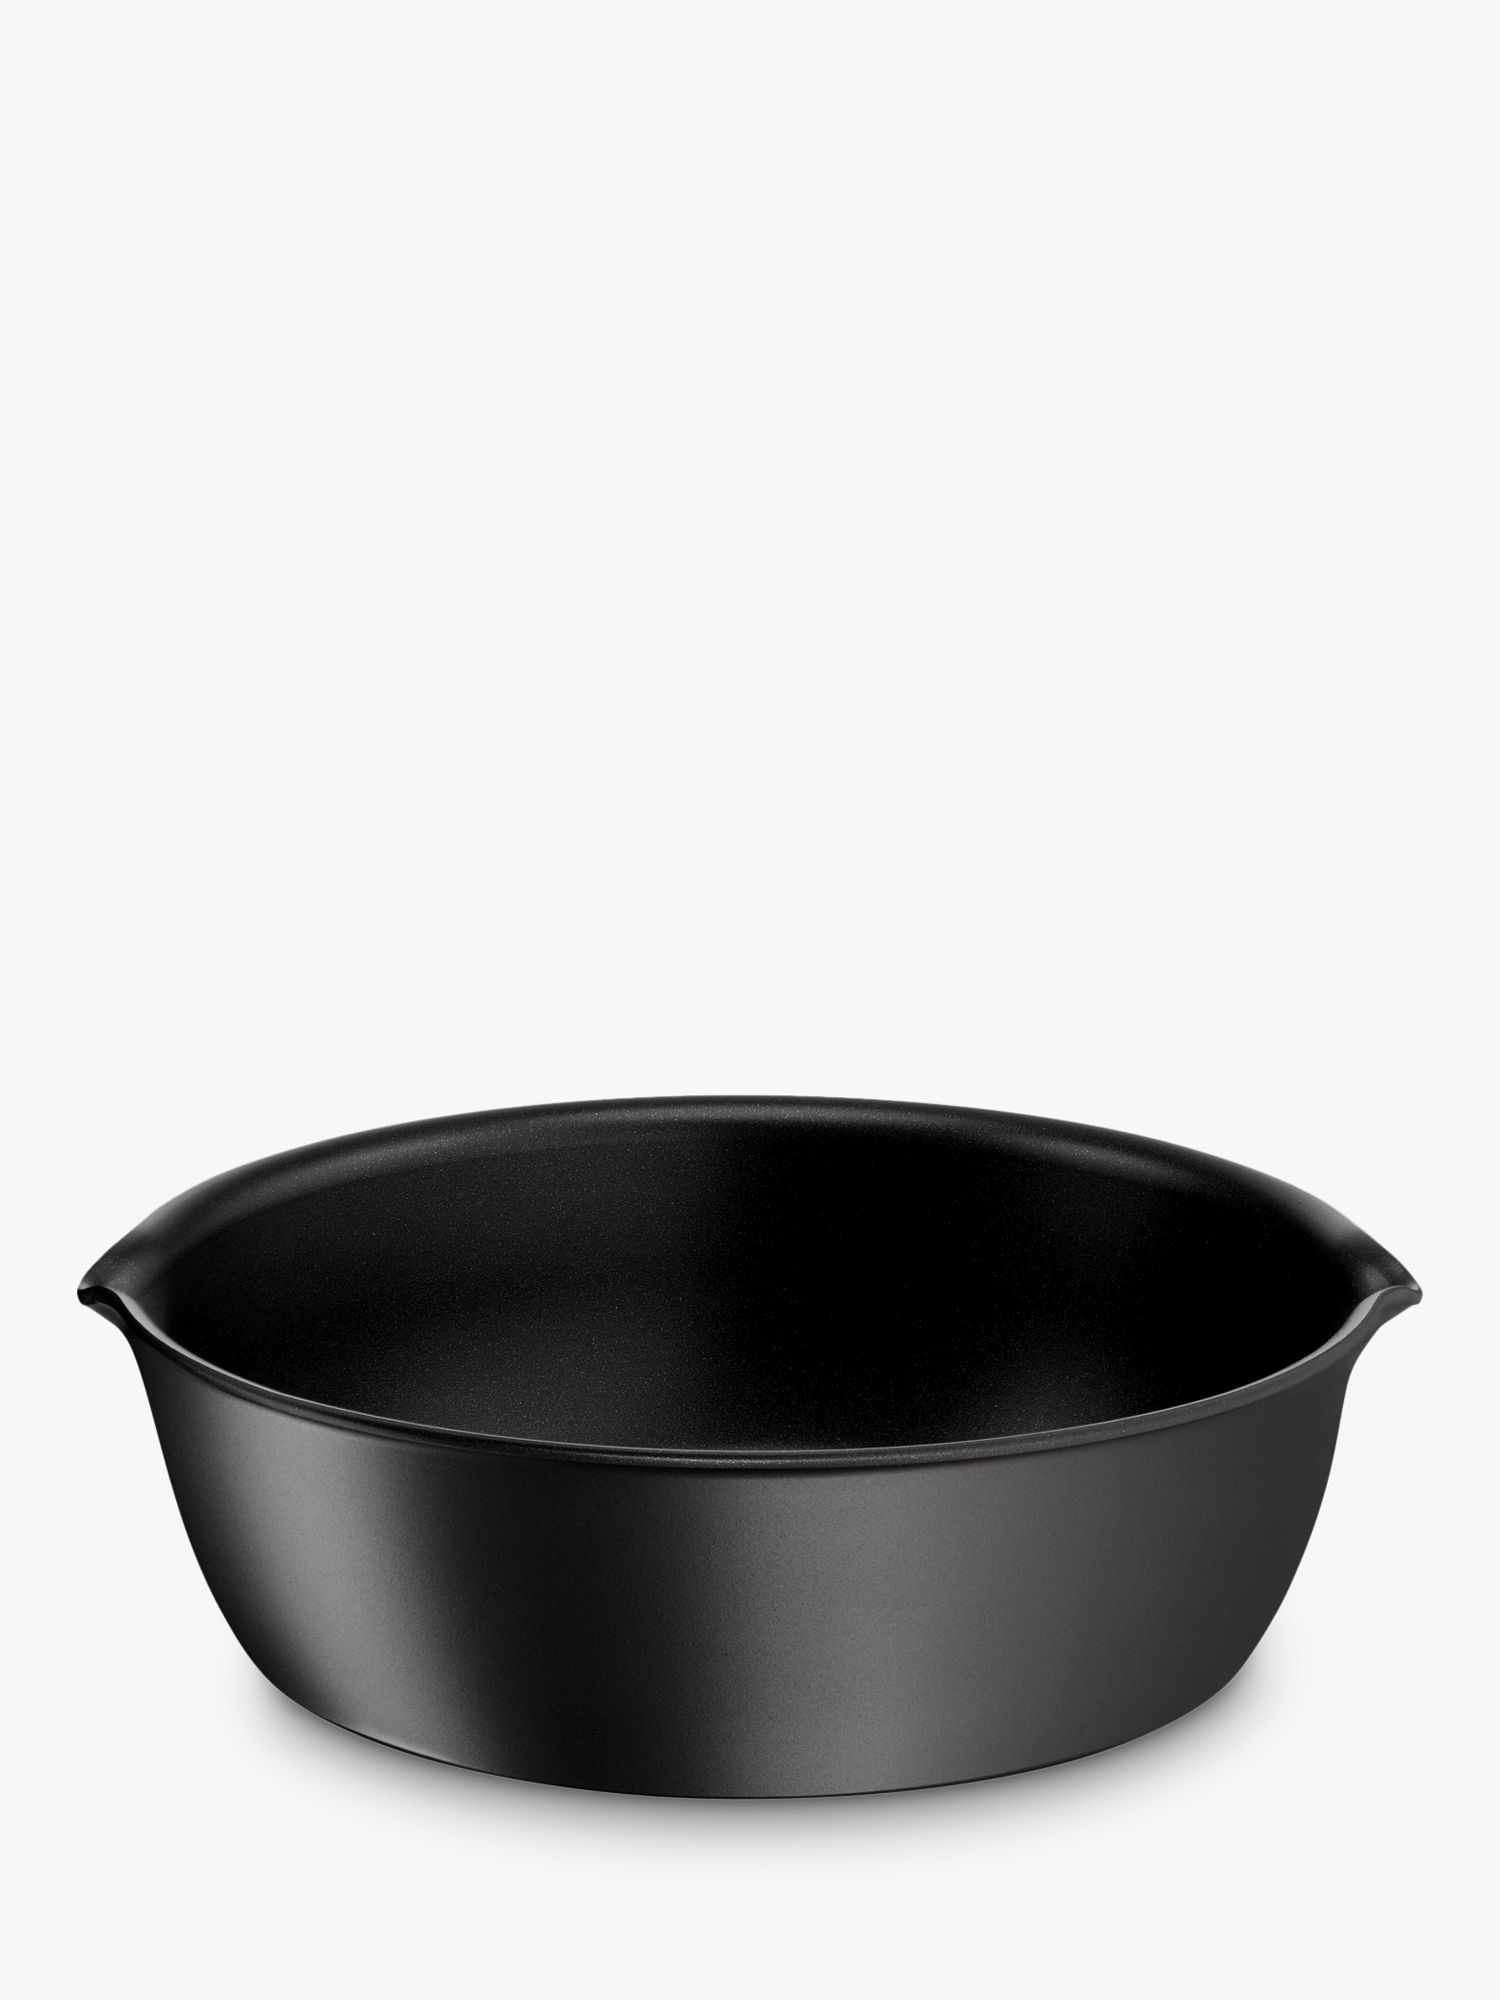 Tefal Ultimate Induction Non-Stick Multipan 26cm In Black